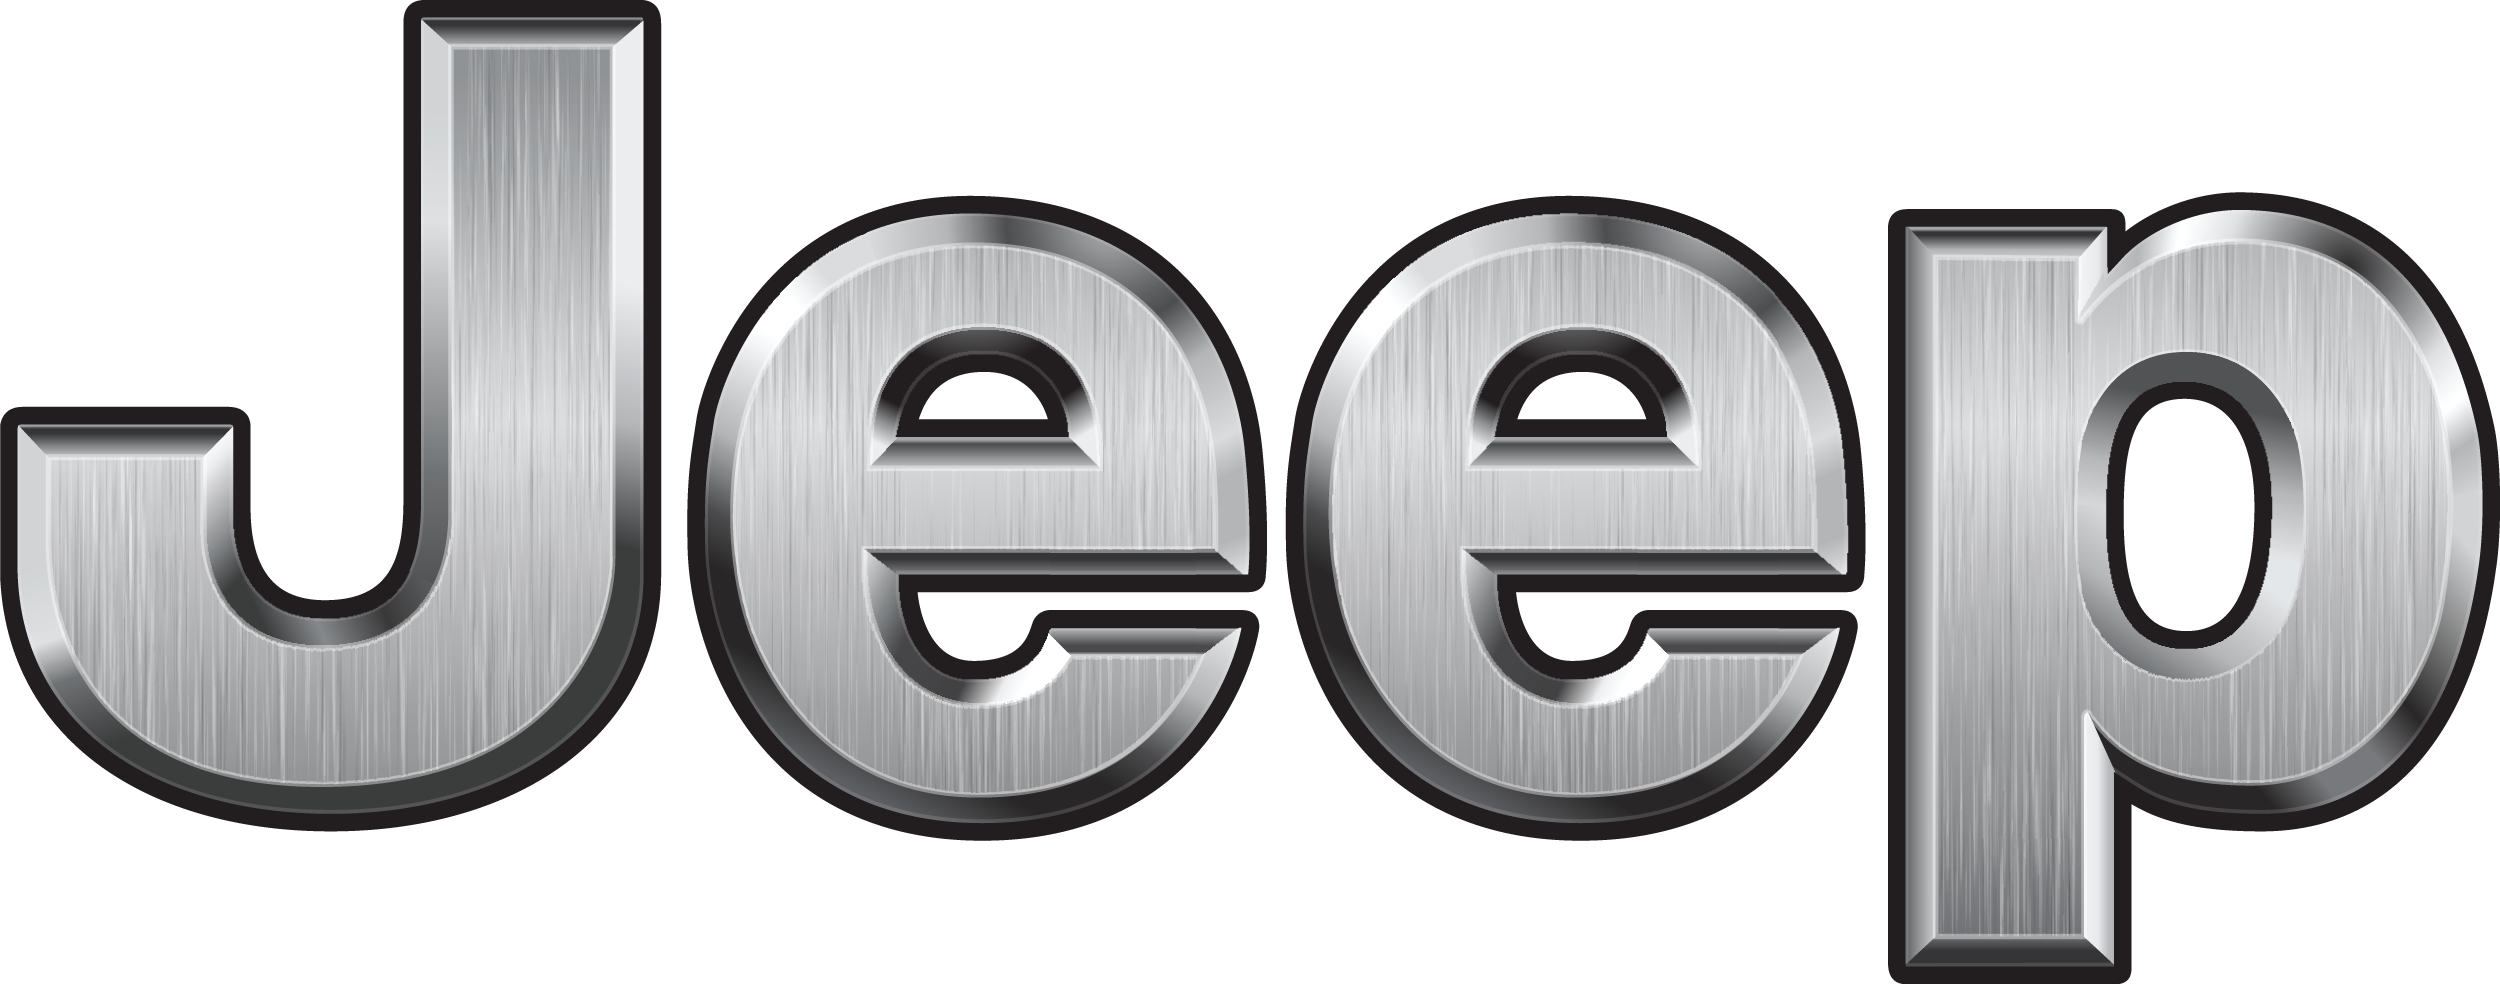 Download PNG image - Jeep Logo PNG HD Isolated 